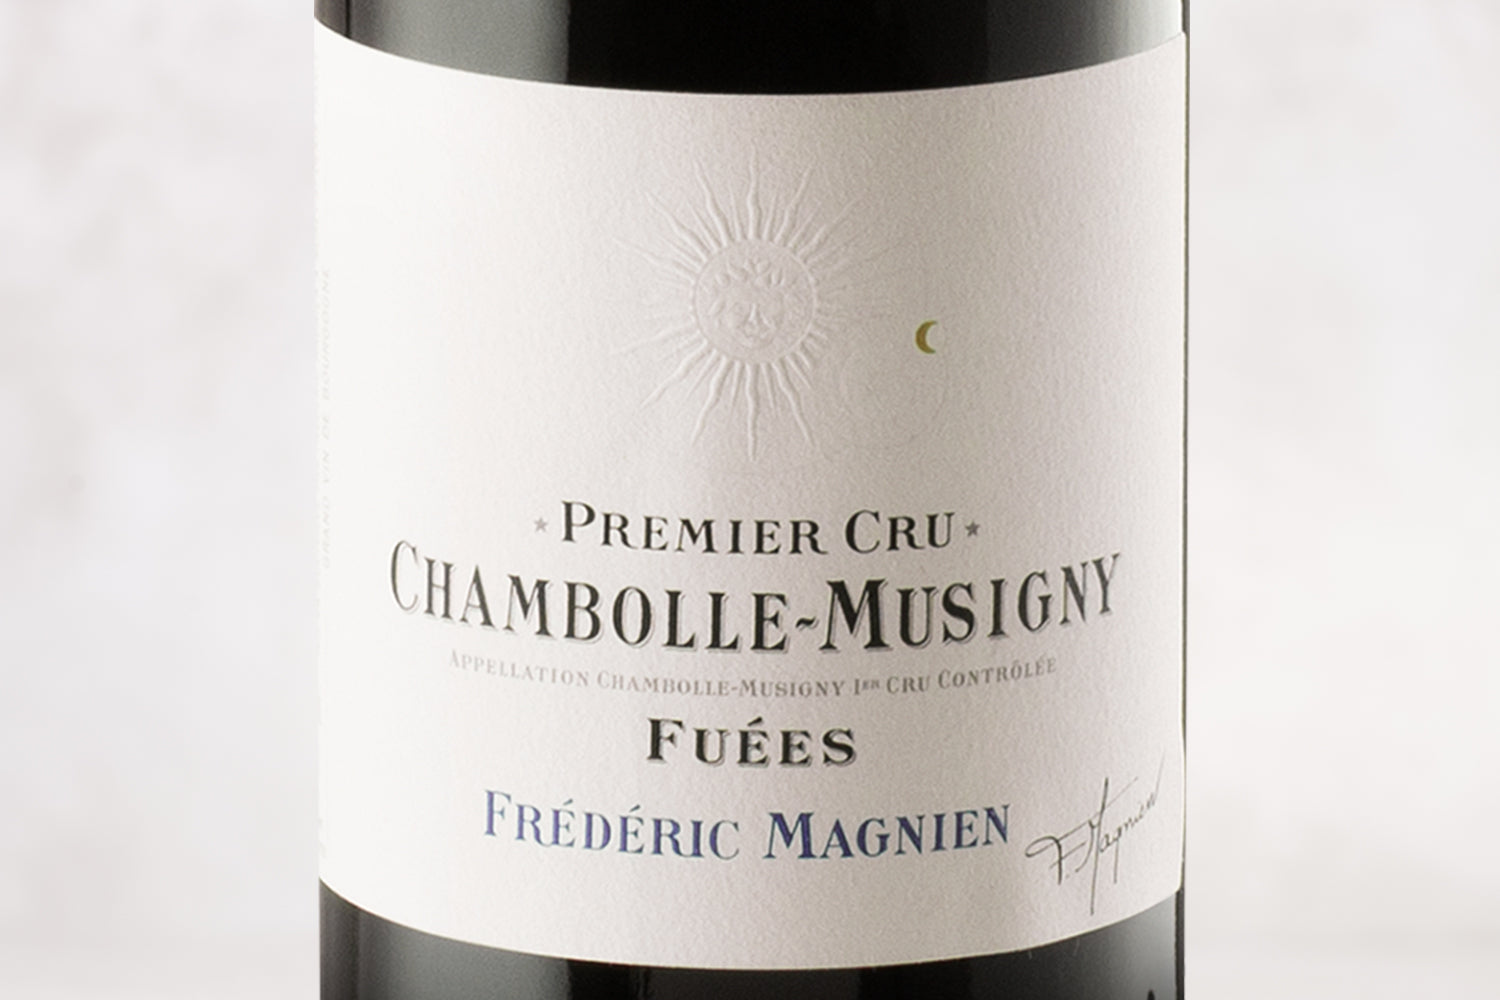 Magnien Chambolle-Musigny 1er Cru “Fuees”